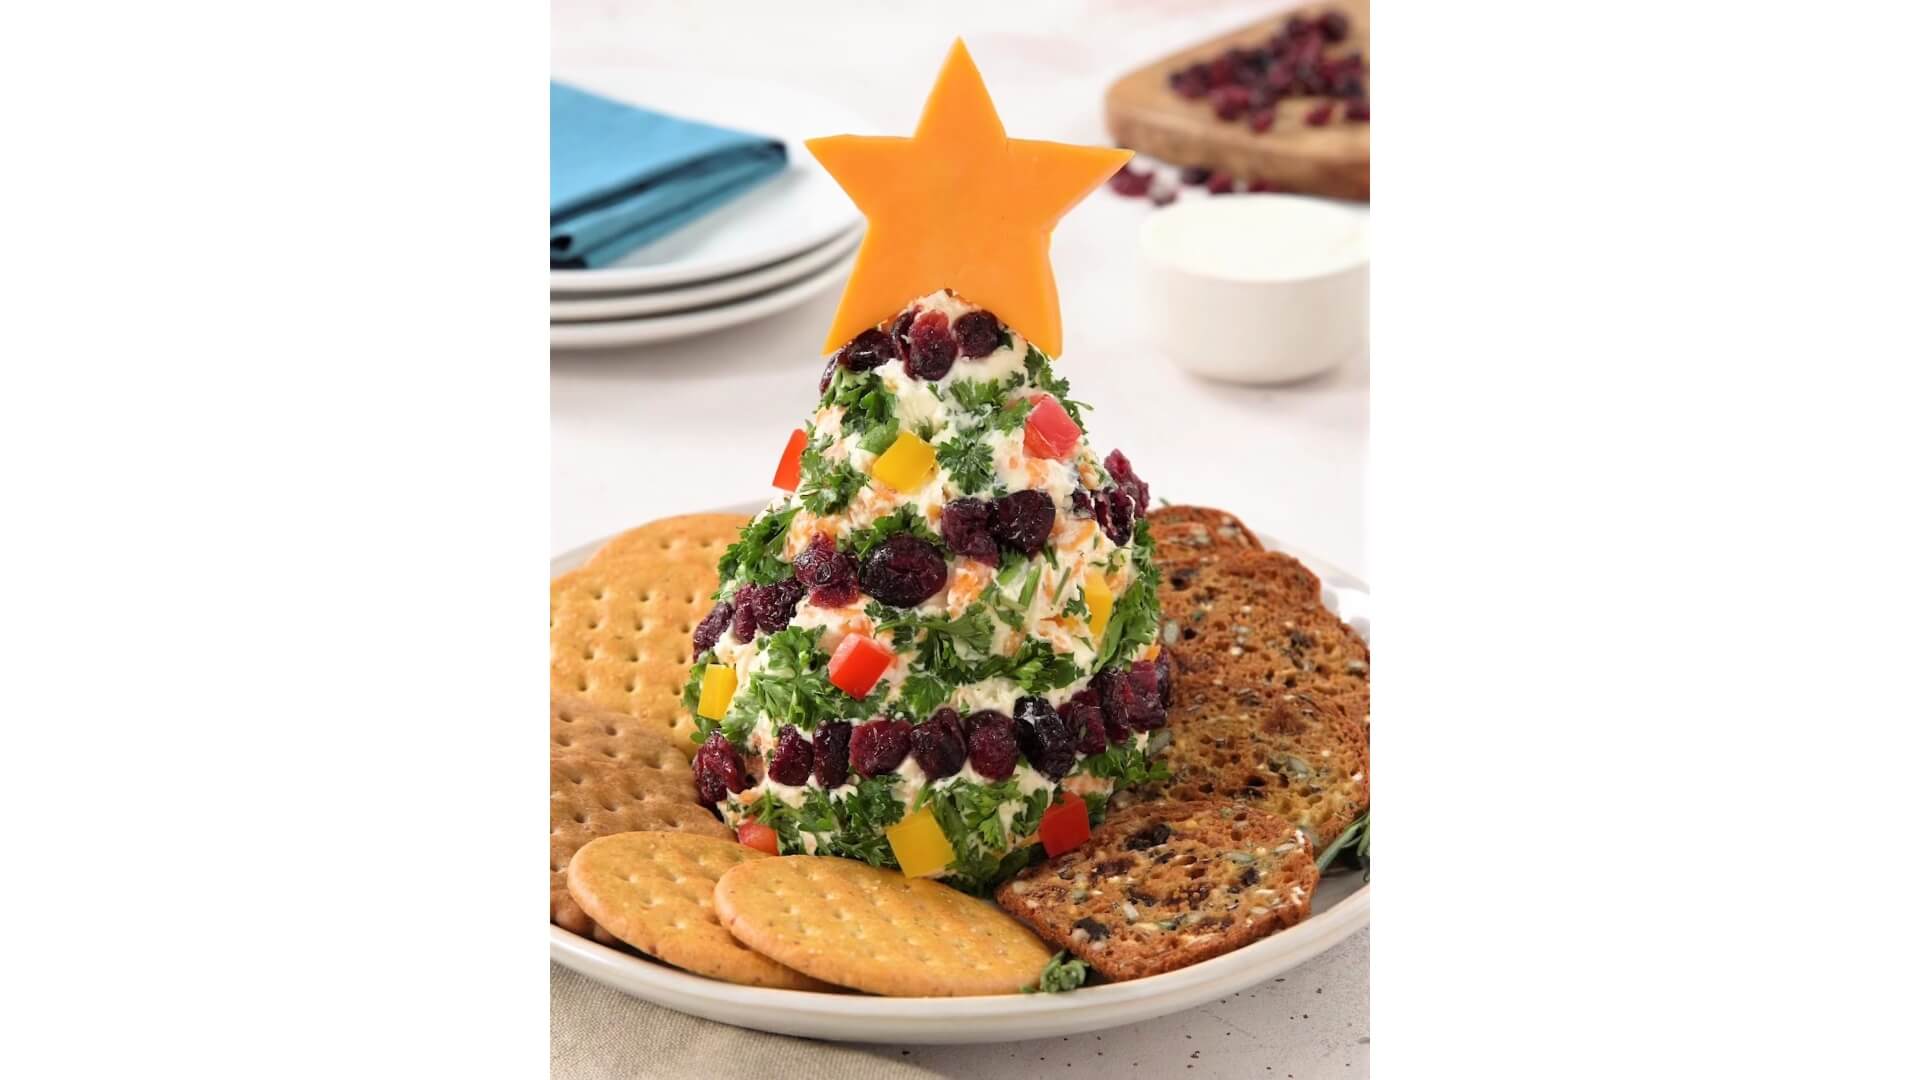 Plate holding a cheese ball shaped as a tree with garnishes displayed as ornaments. Topped with Cheddar cheese shaped as a star 